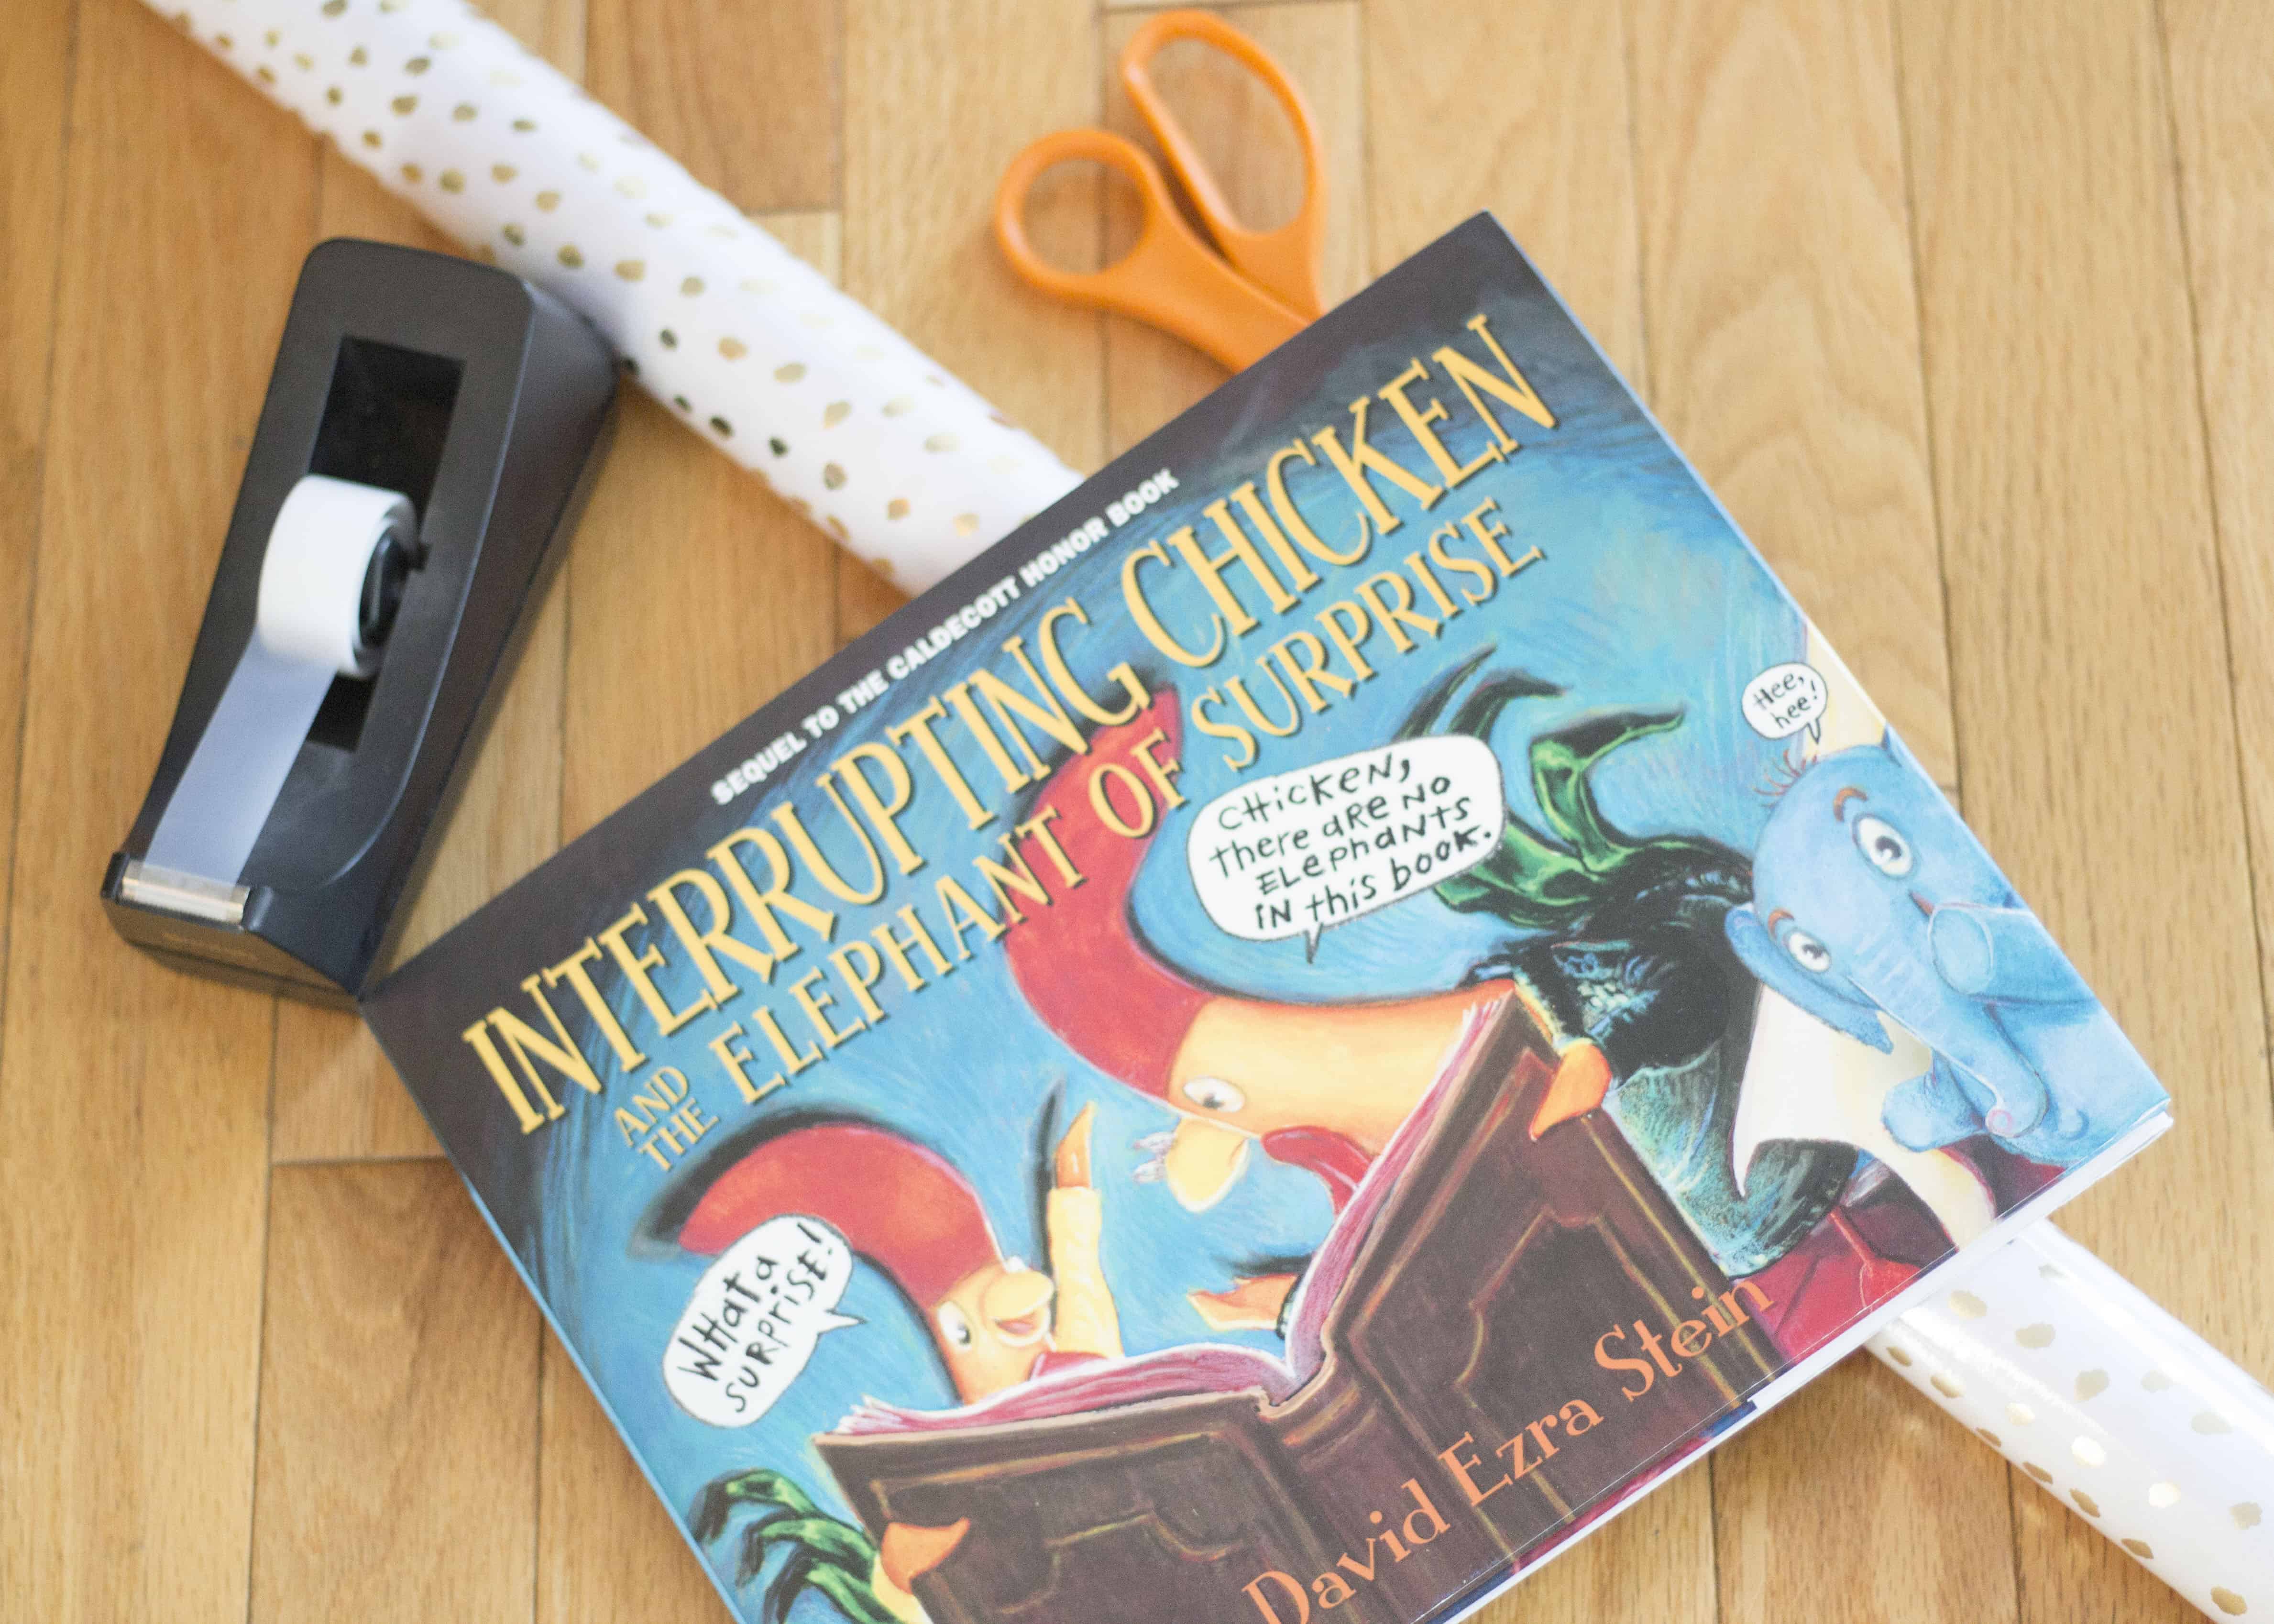 interrupting chicken and the elephant of surprise book